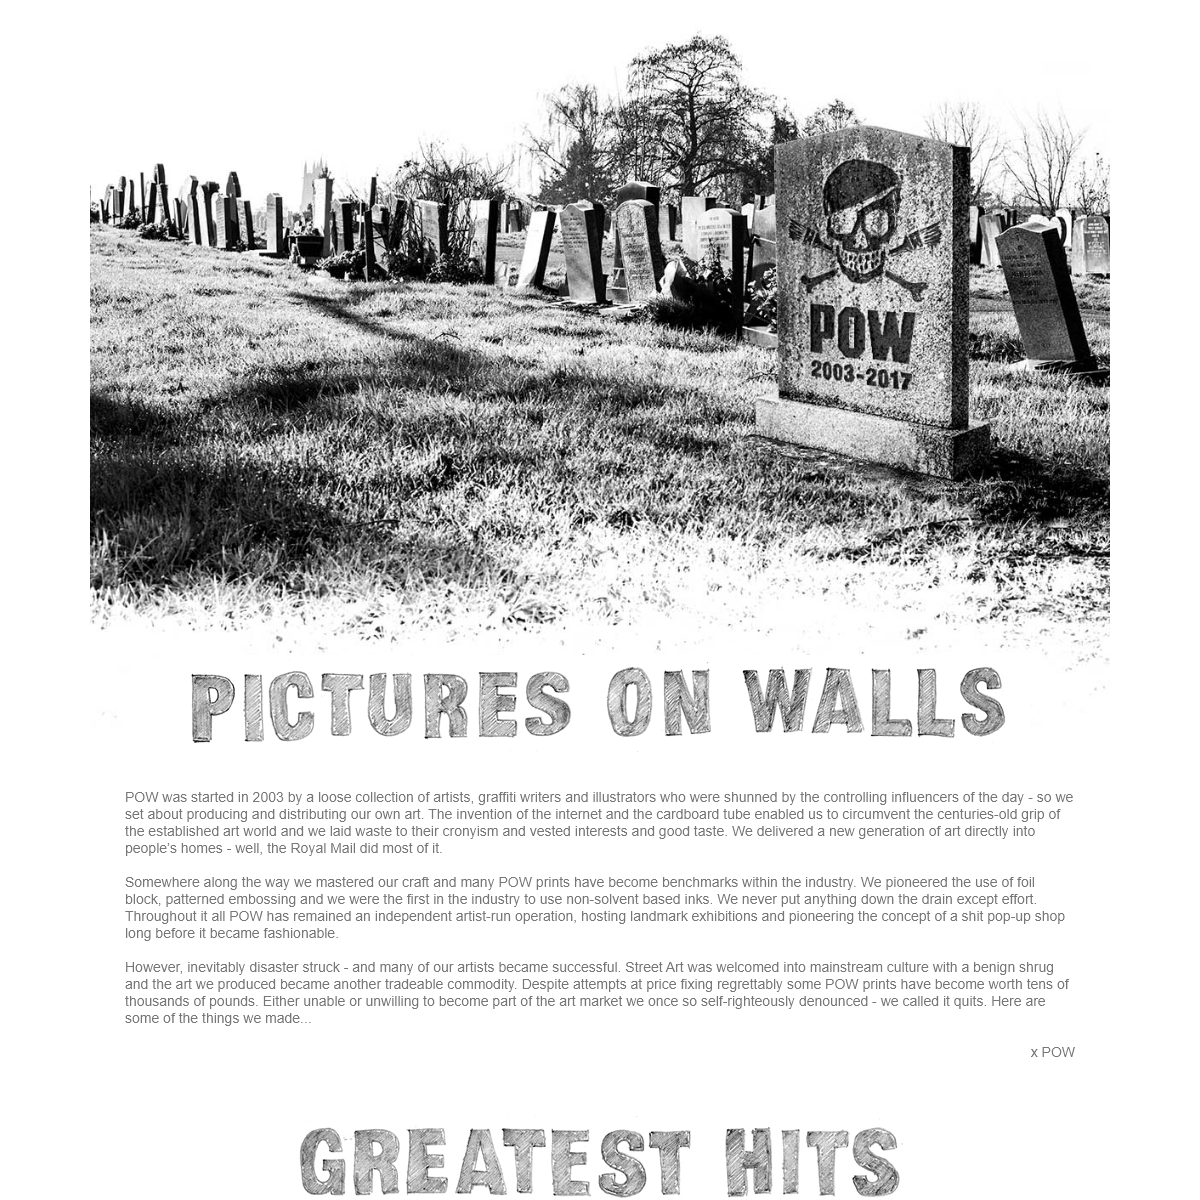 A complete backup of picturesonwalls.com